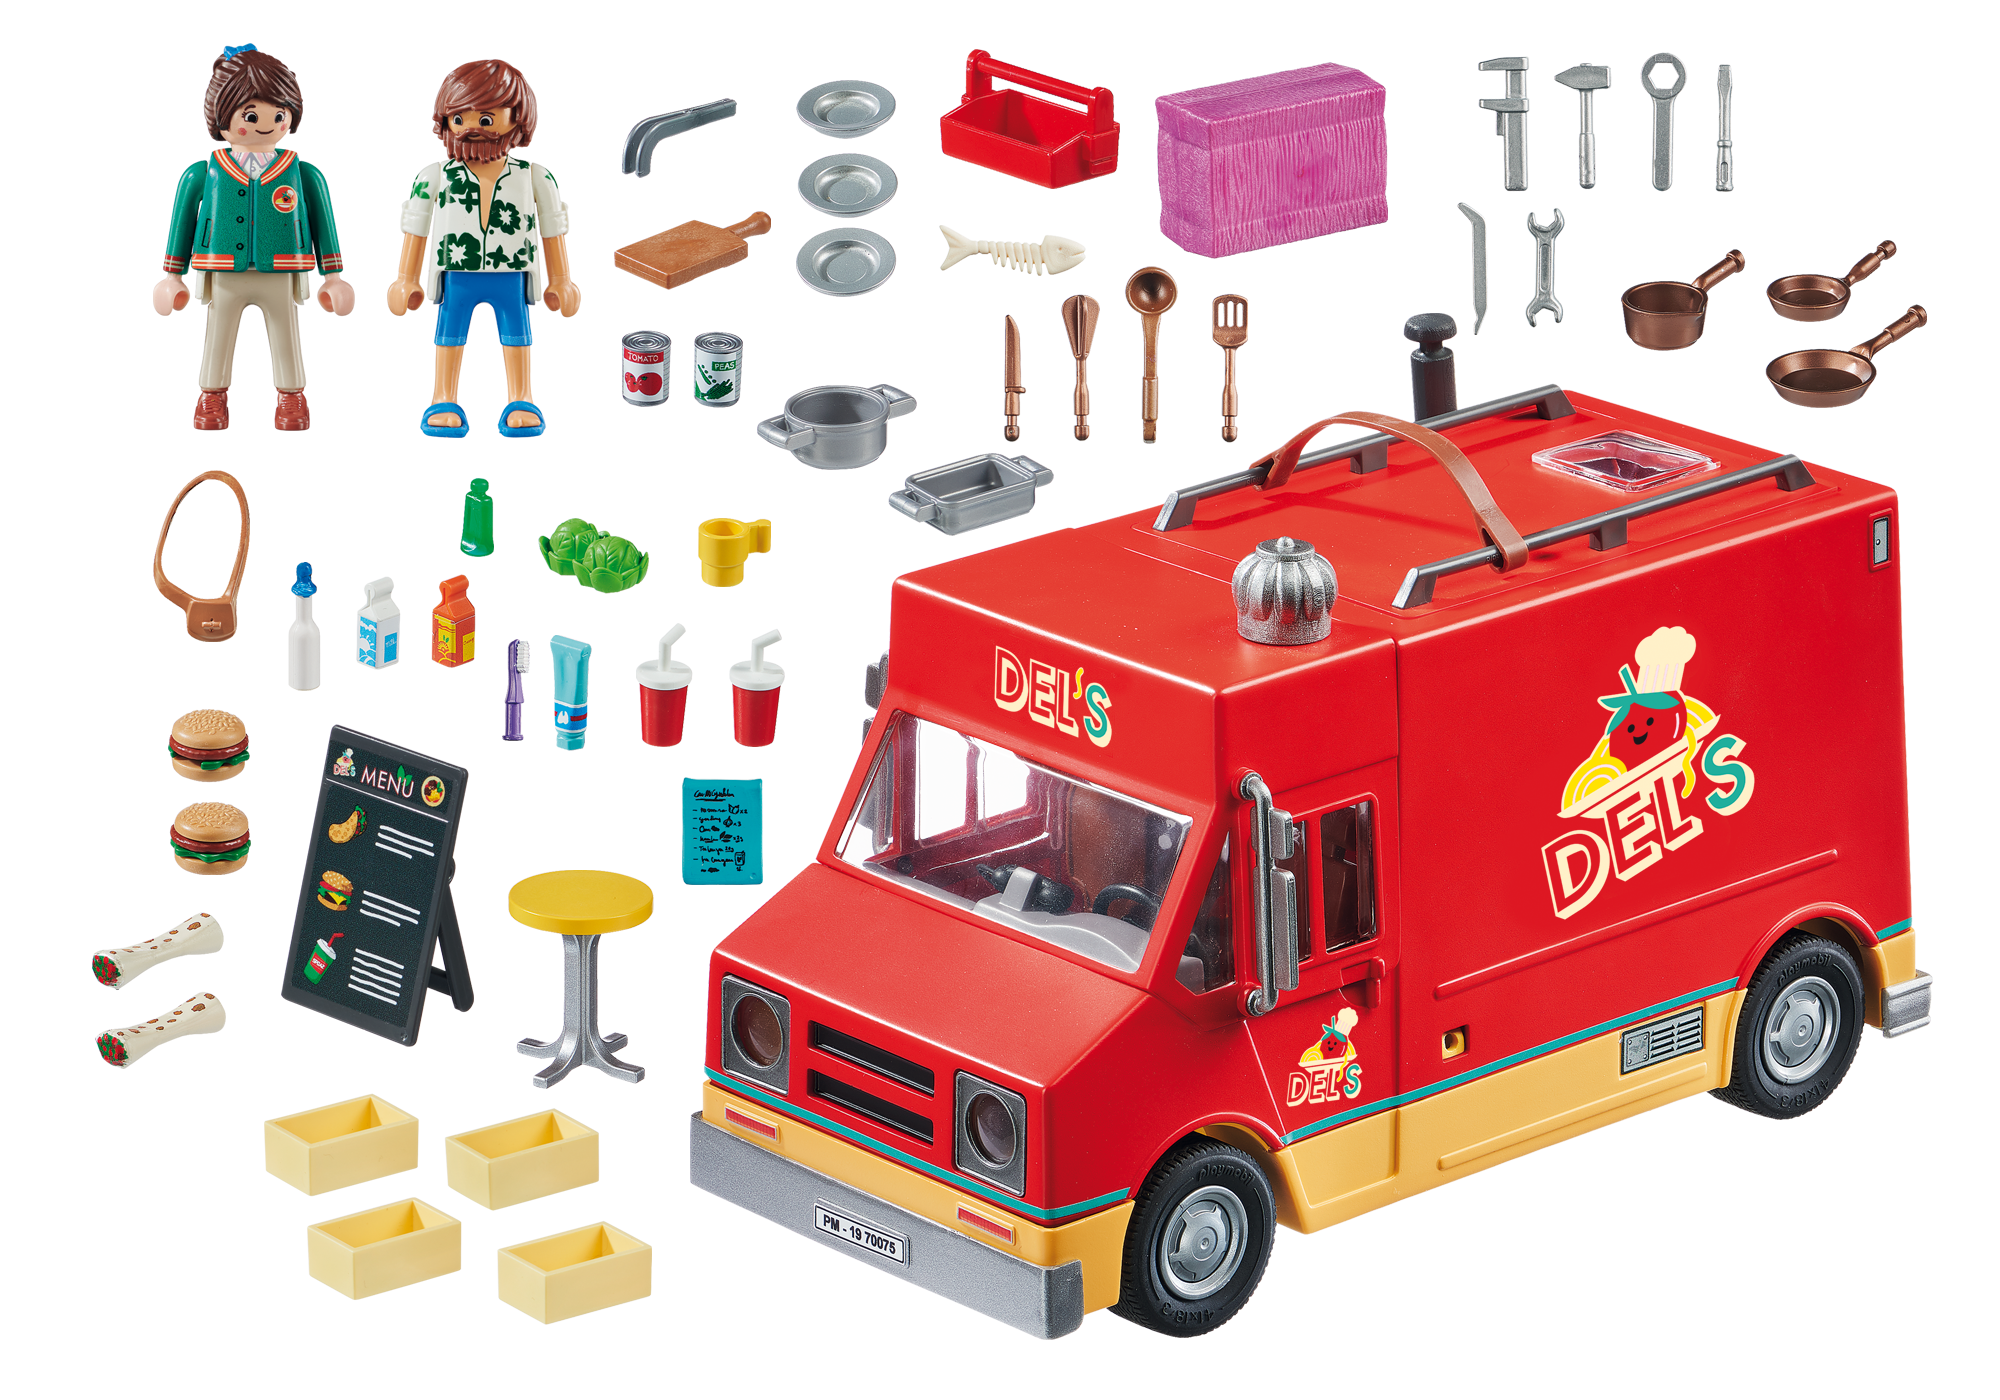 PLAYMOBIL: THE MOVIE Del's Food Truck 